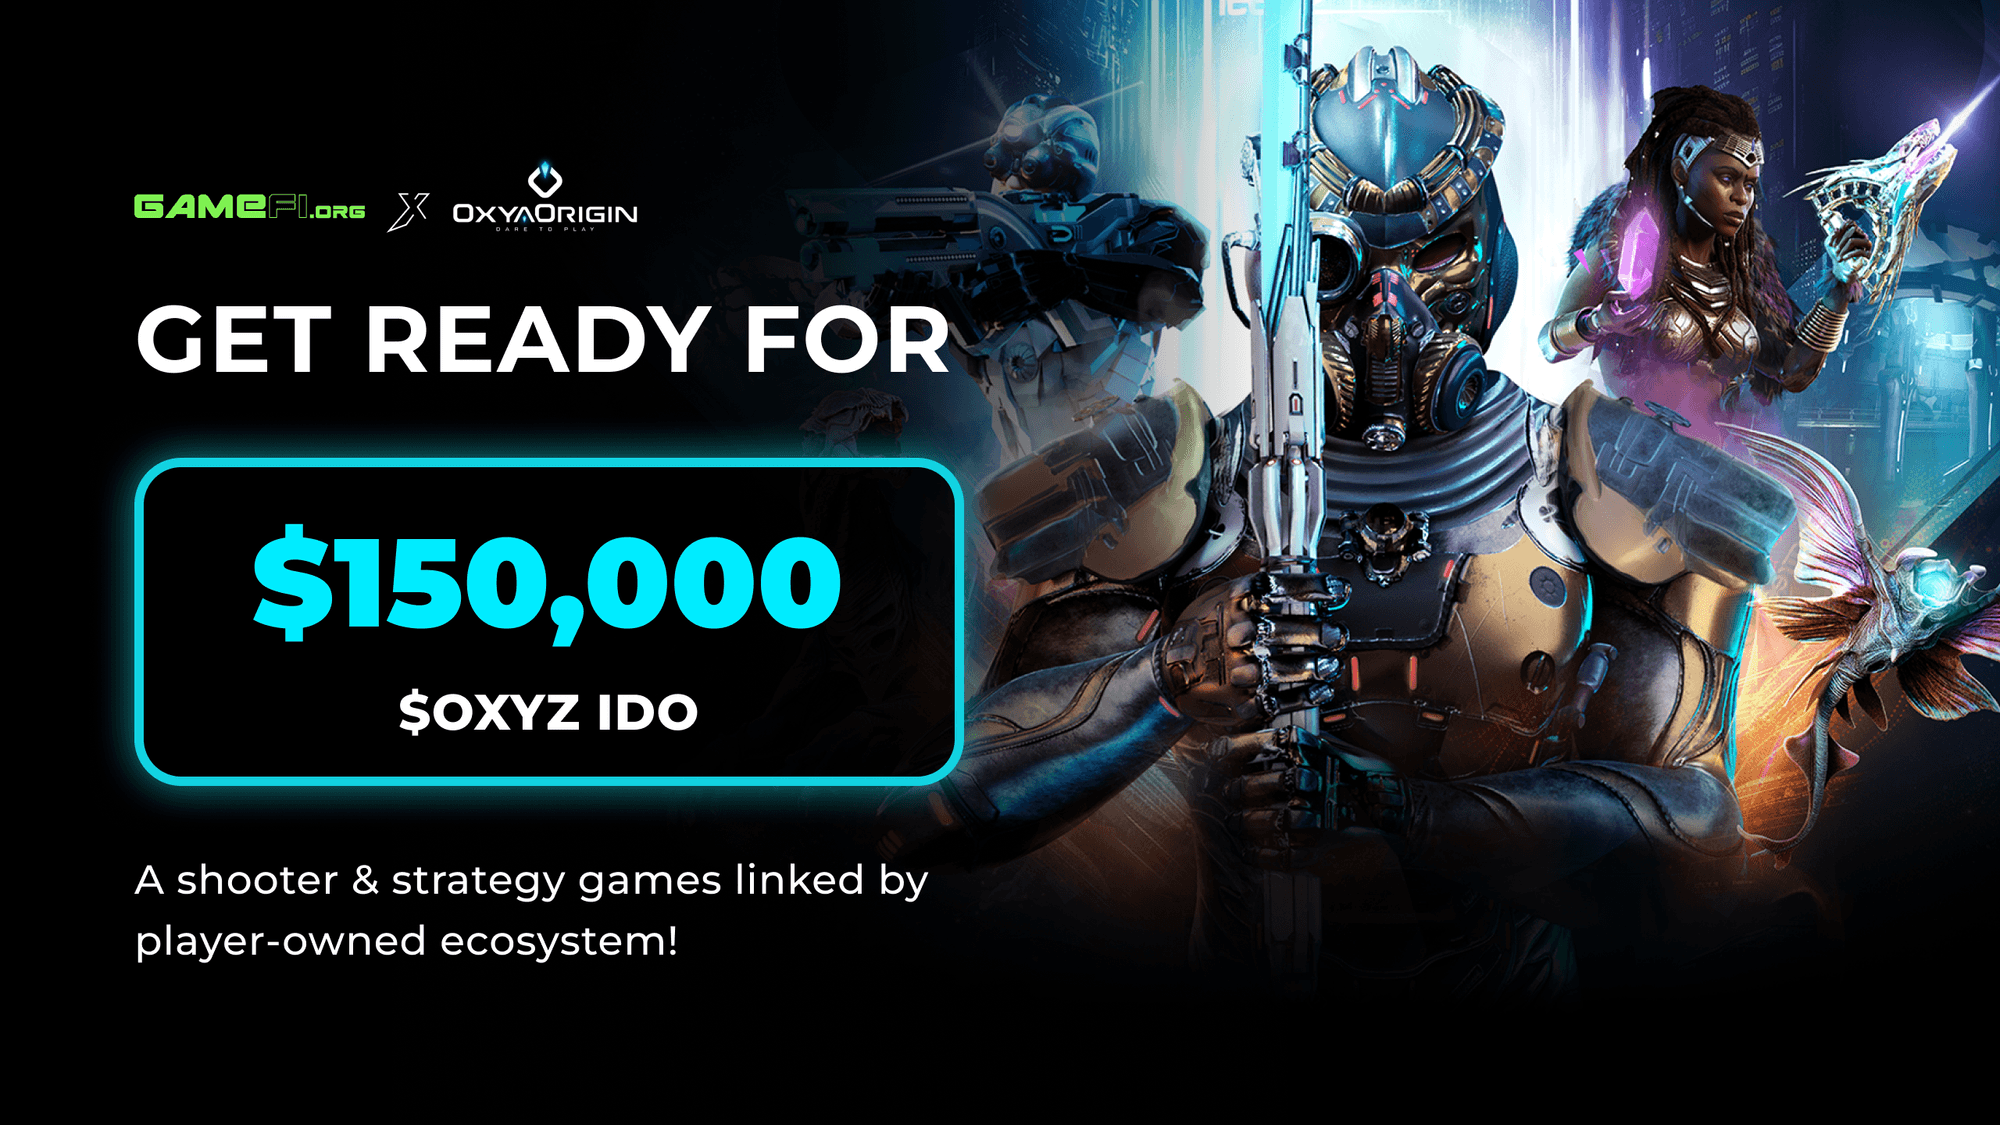 Get Ready for $150,000 $OXYZ IDO - The Innovative Shooter Player-owned Game World!